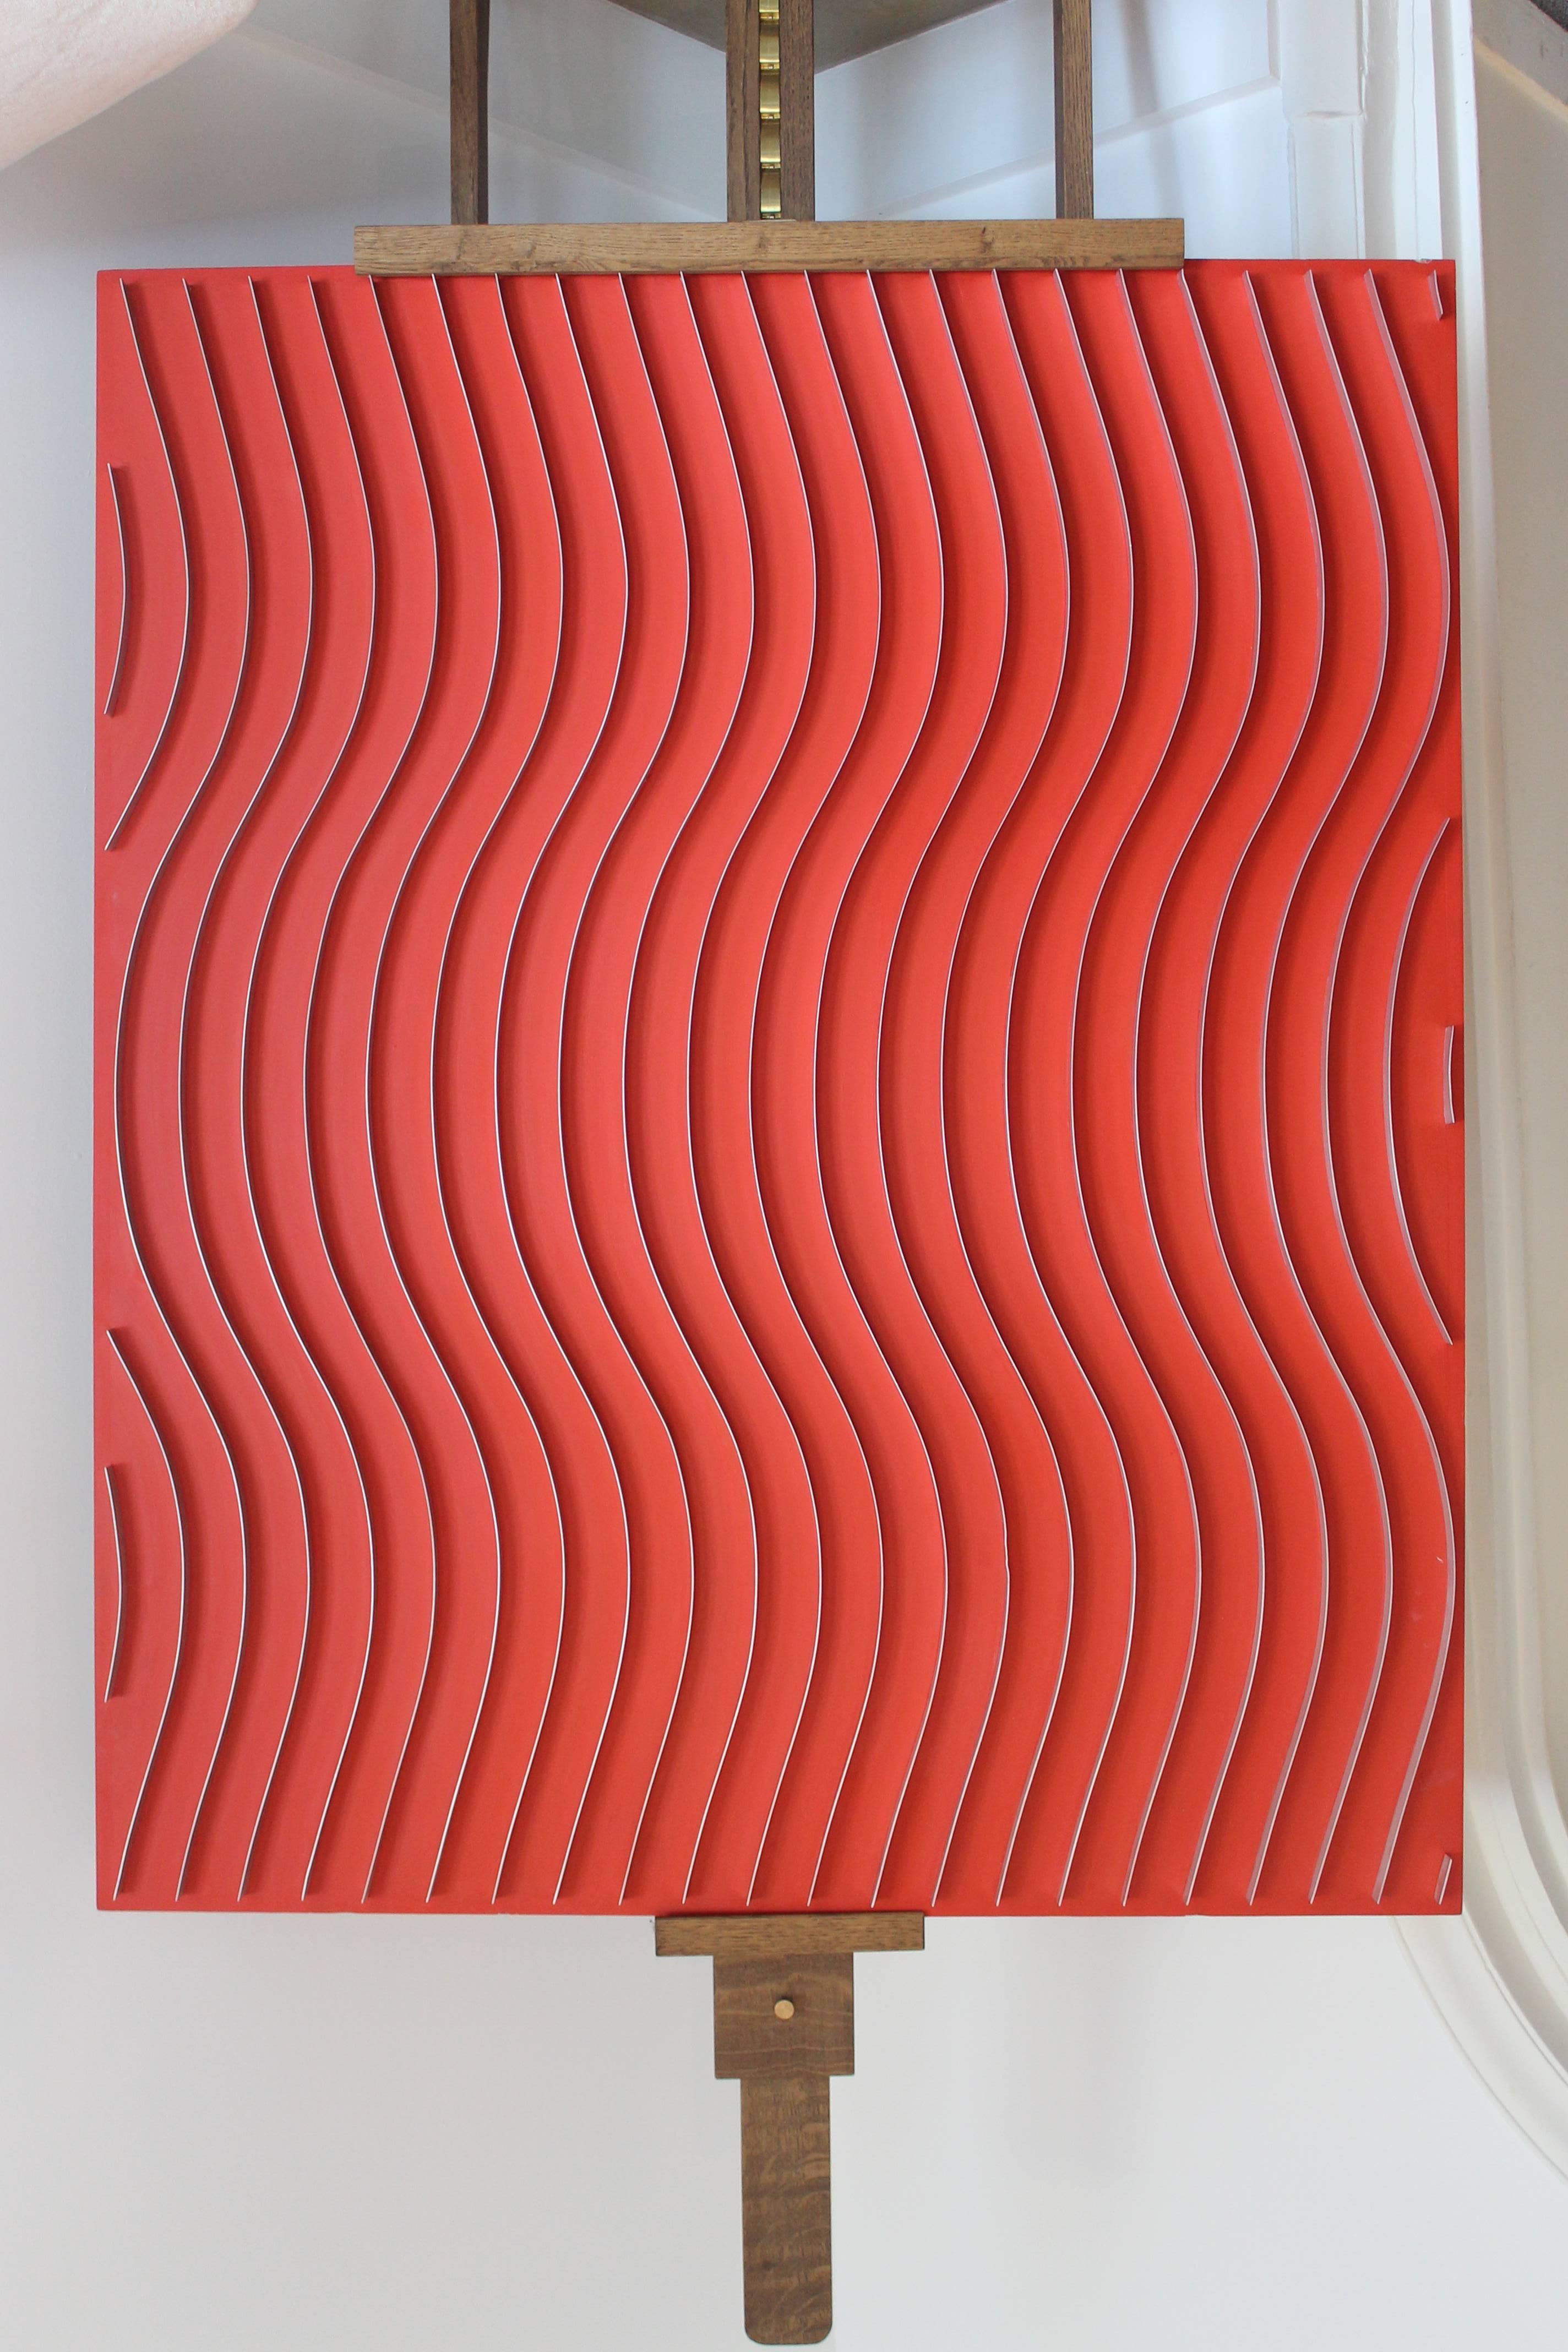 Marc Cavell (1911-1989).
Red sinuzoi¨de or sculpted-painting.
Steel blades on a red painted wood.

Signed on the reverse.
France, 1974.
Measures: H 124 cm, W 103 cm, D 5 cm.
 